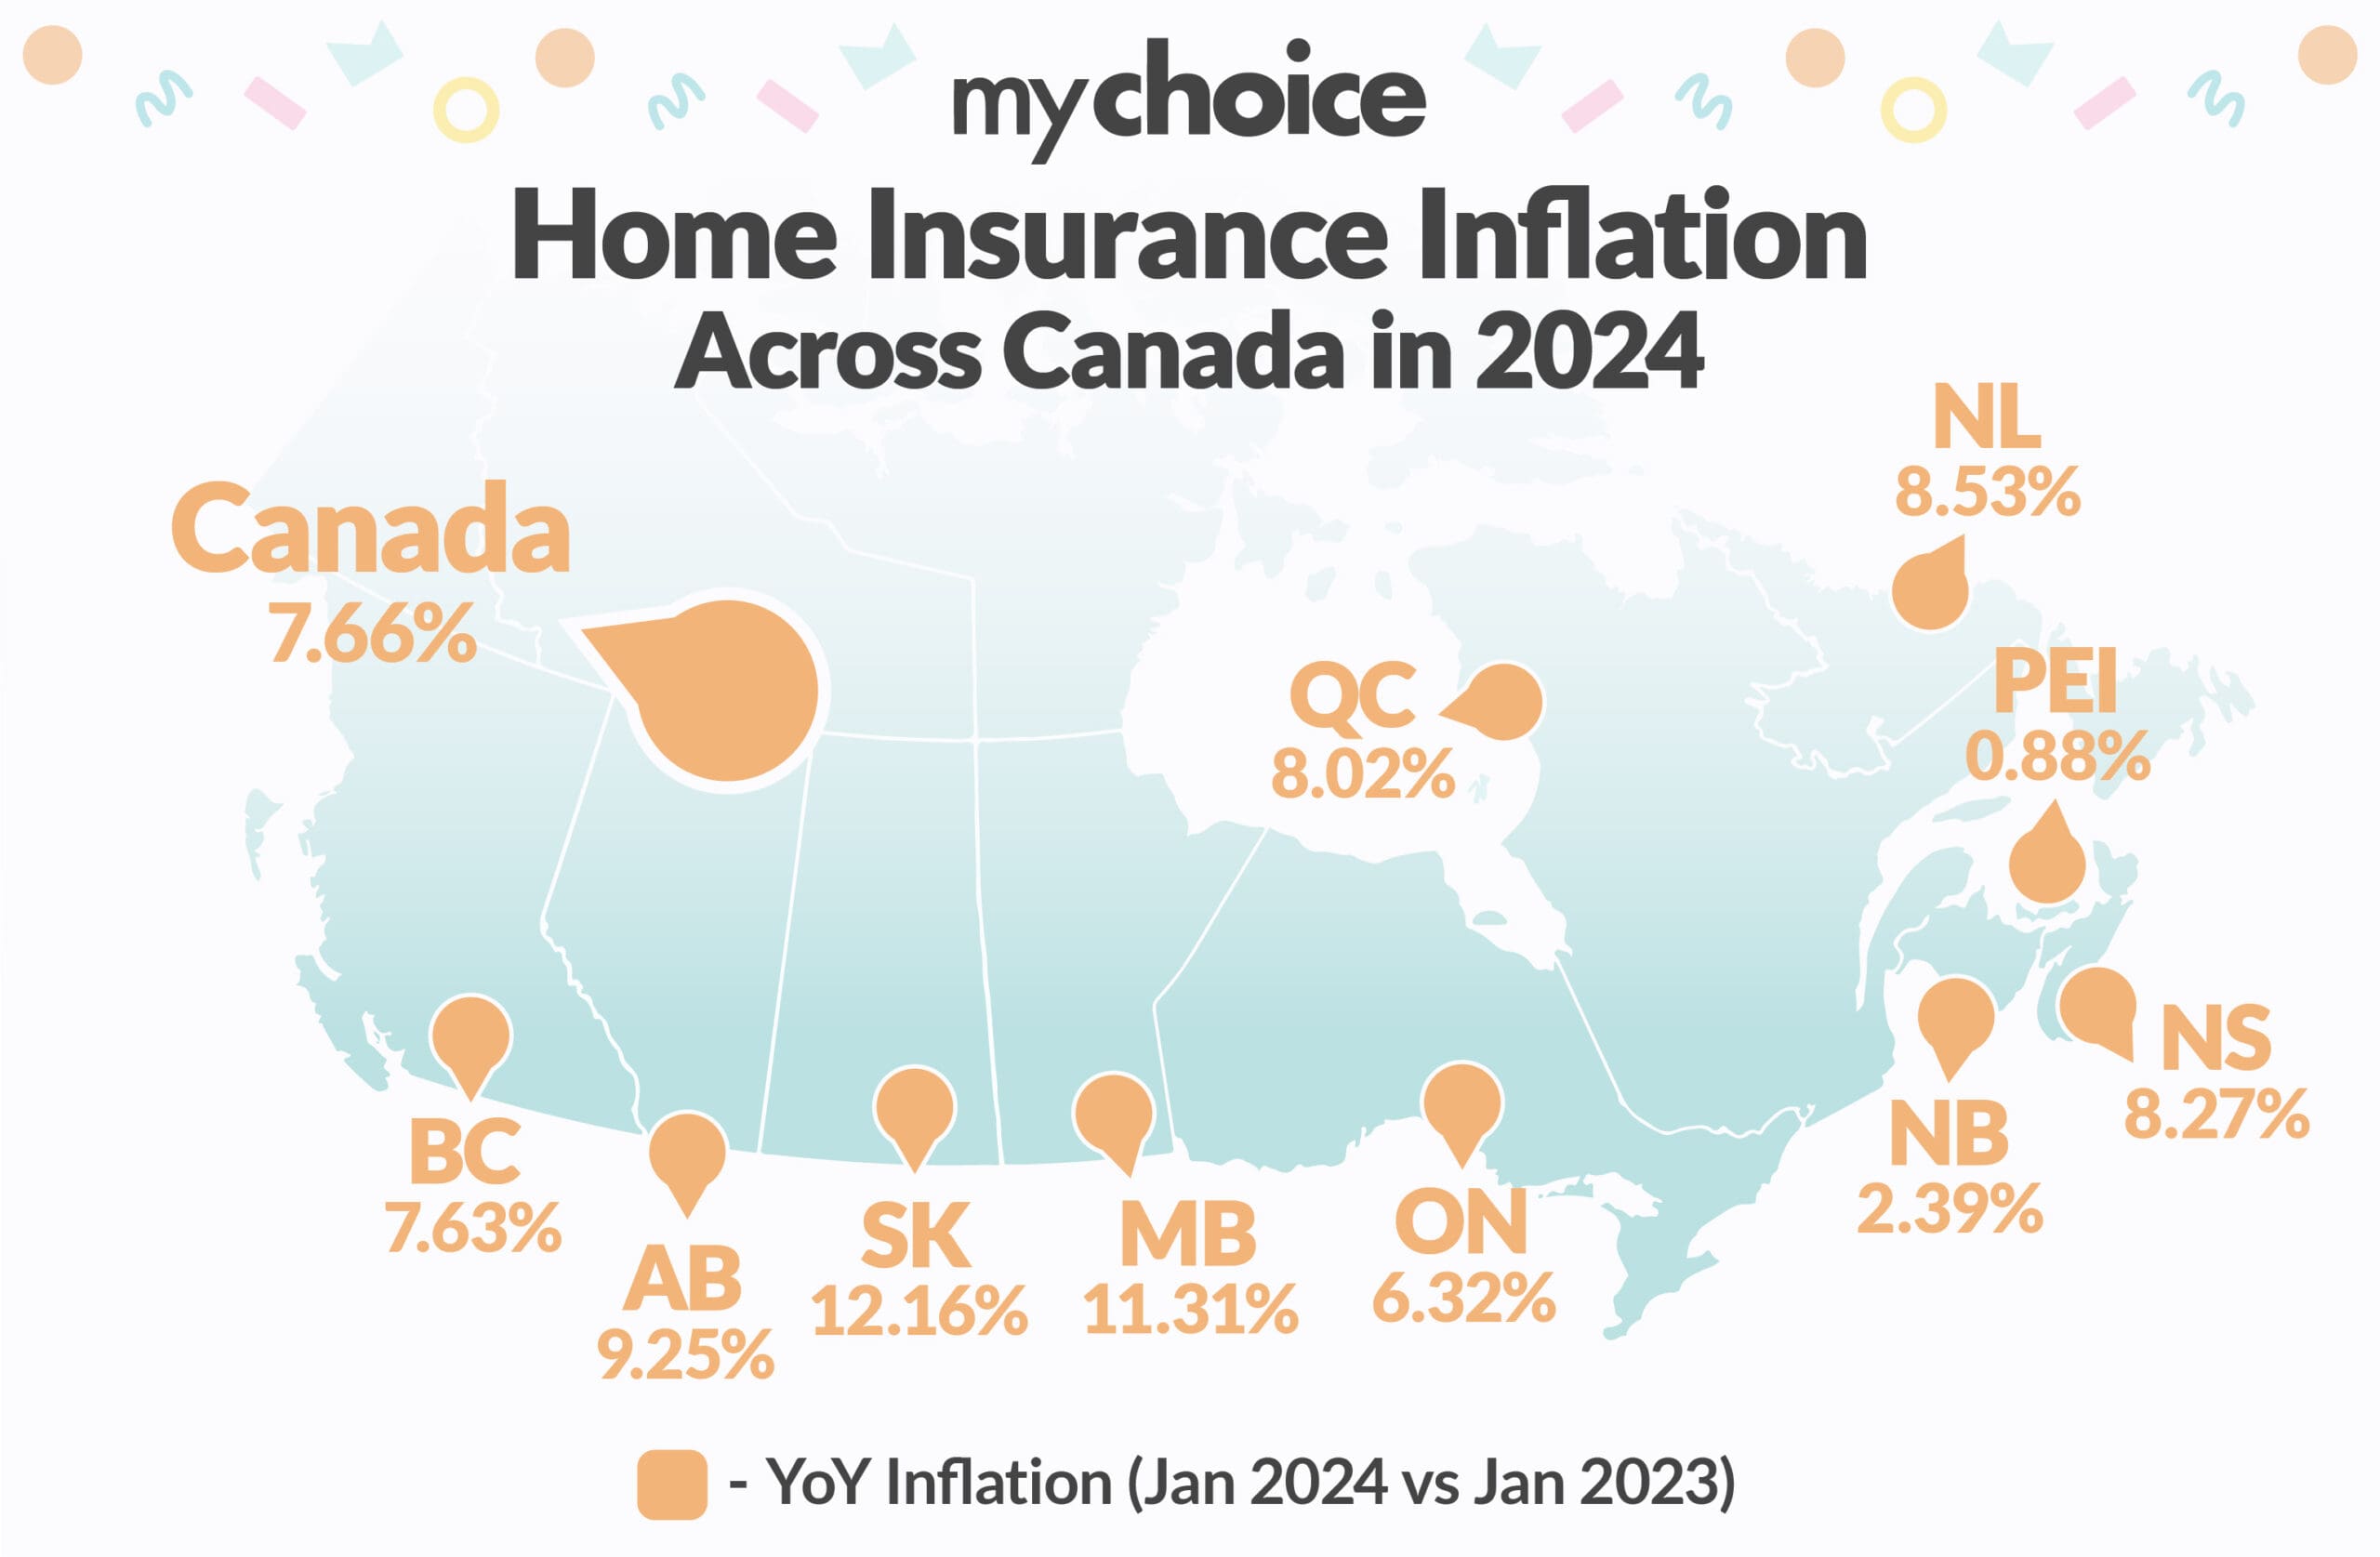 Home Insurance Inflation Across Canada in 2024